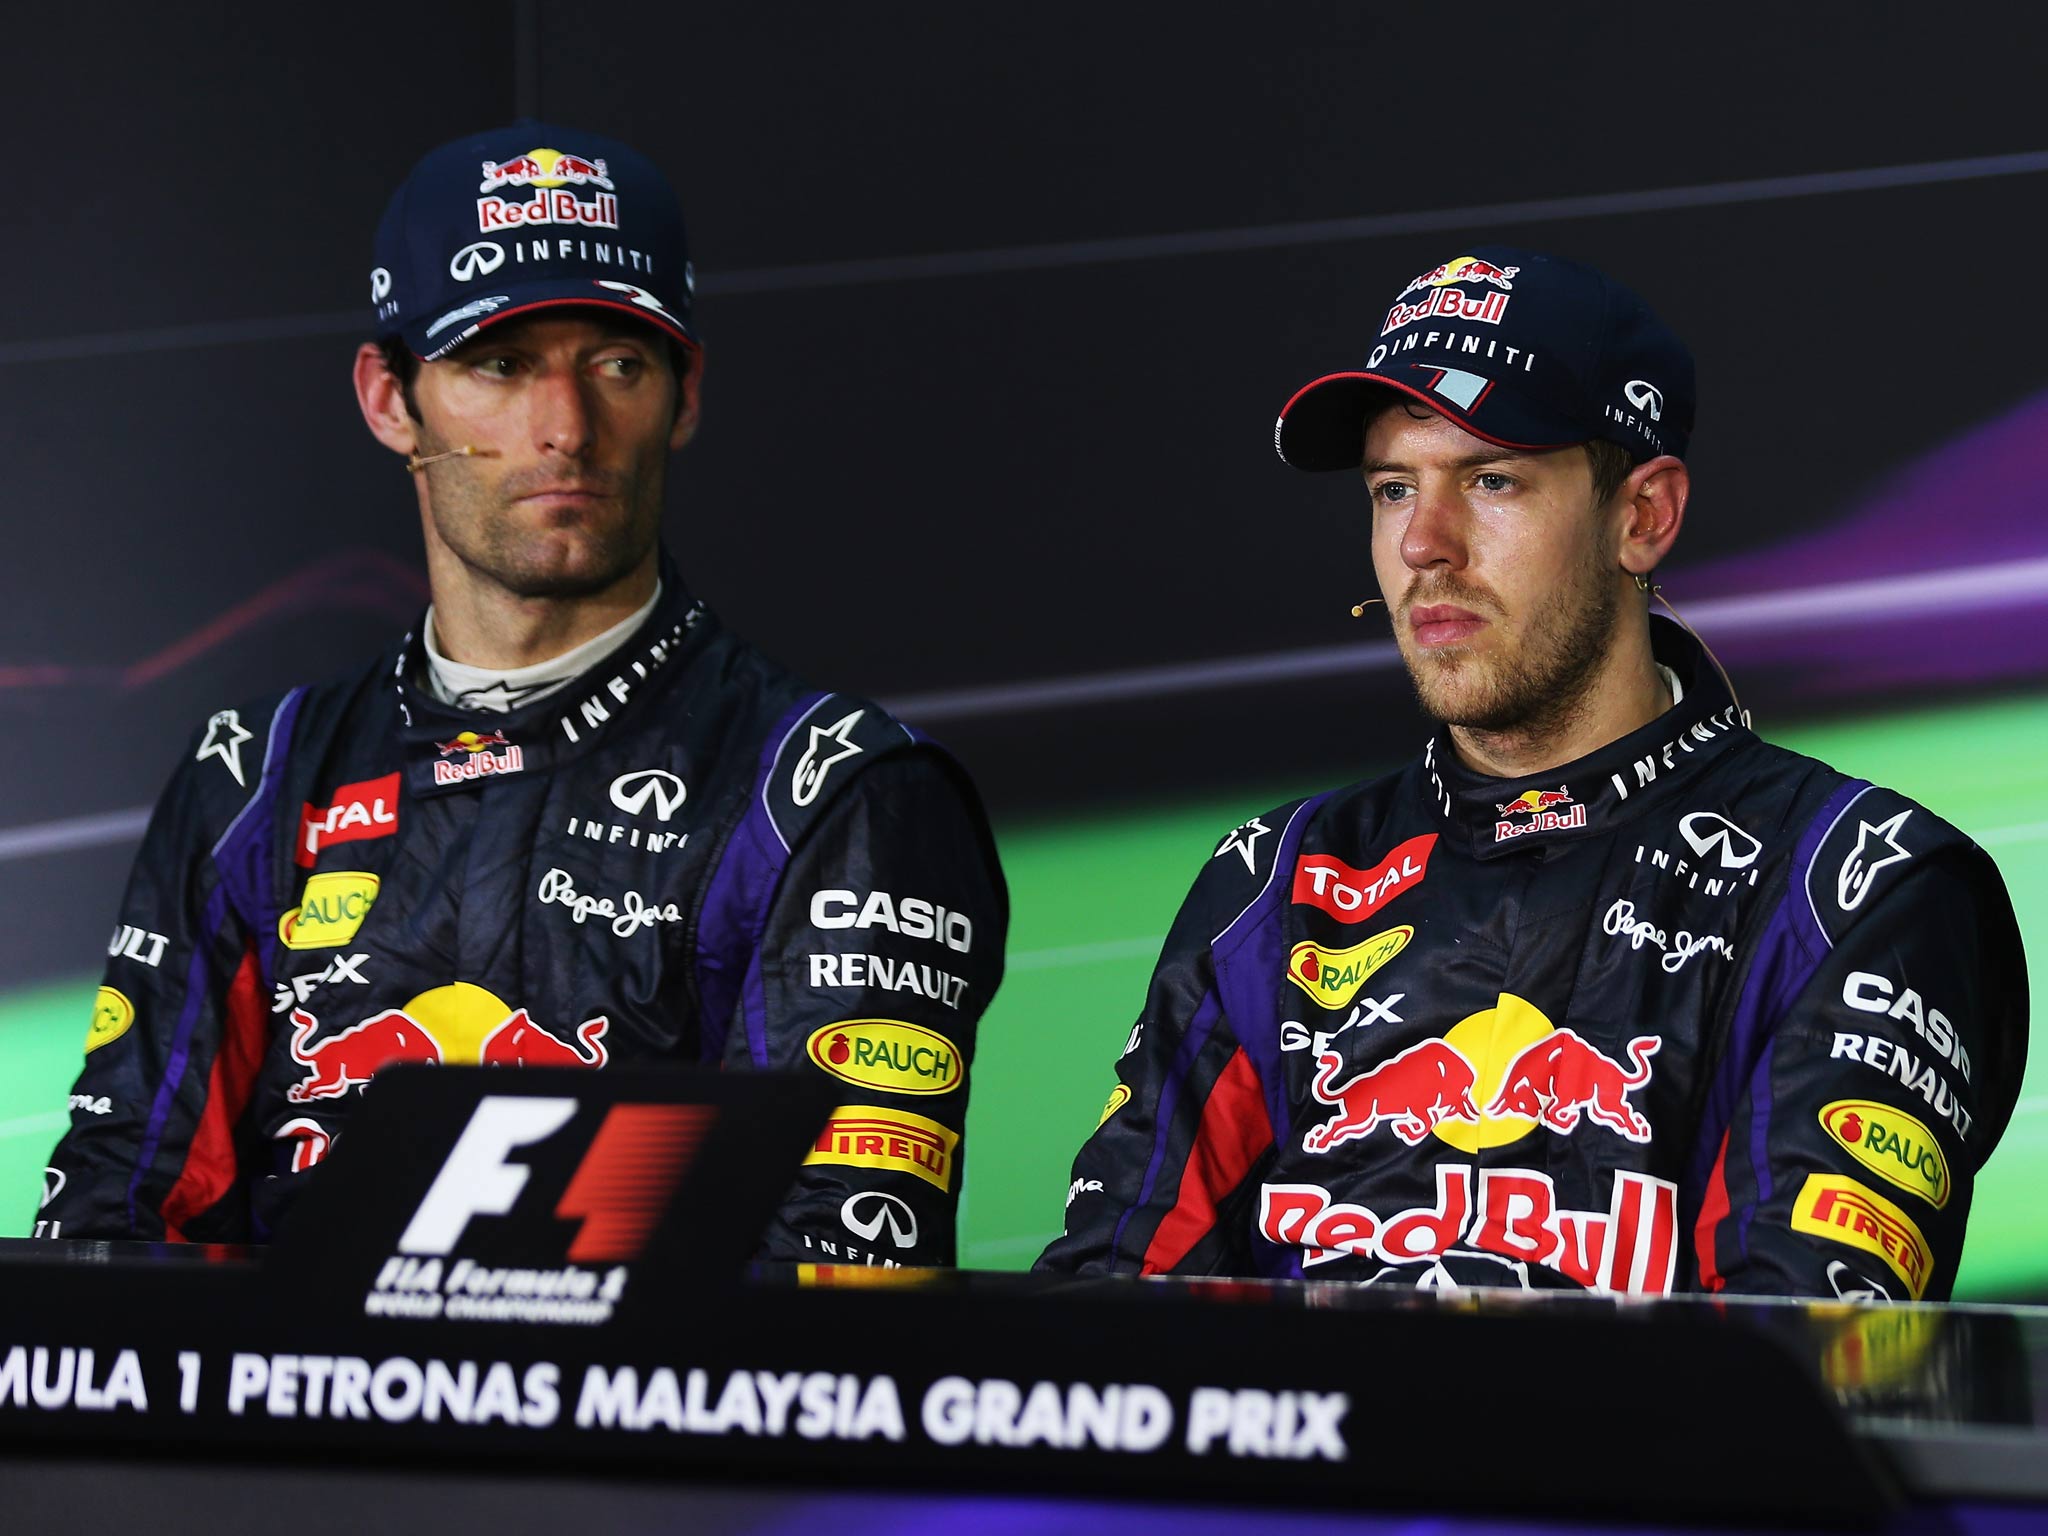 Sebastian Vettel v Mark Webber The three-time World Champion ignored team orders in Sepang to fight his way past his Australian team-mate to win the Malaysian Grand Prix. As the Red Bull duo duelled on the track, team principal Christian Horner took to the radio to warn: 'This is silly Seb'.